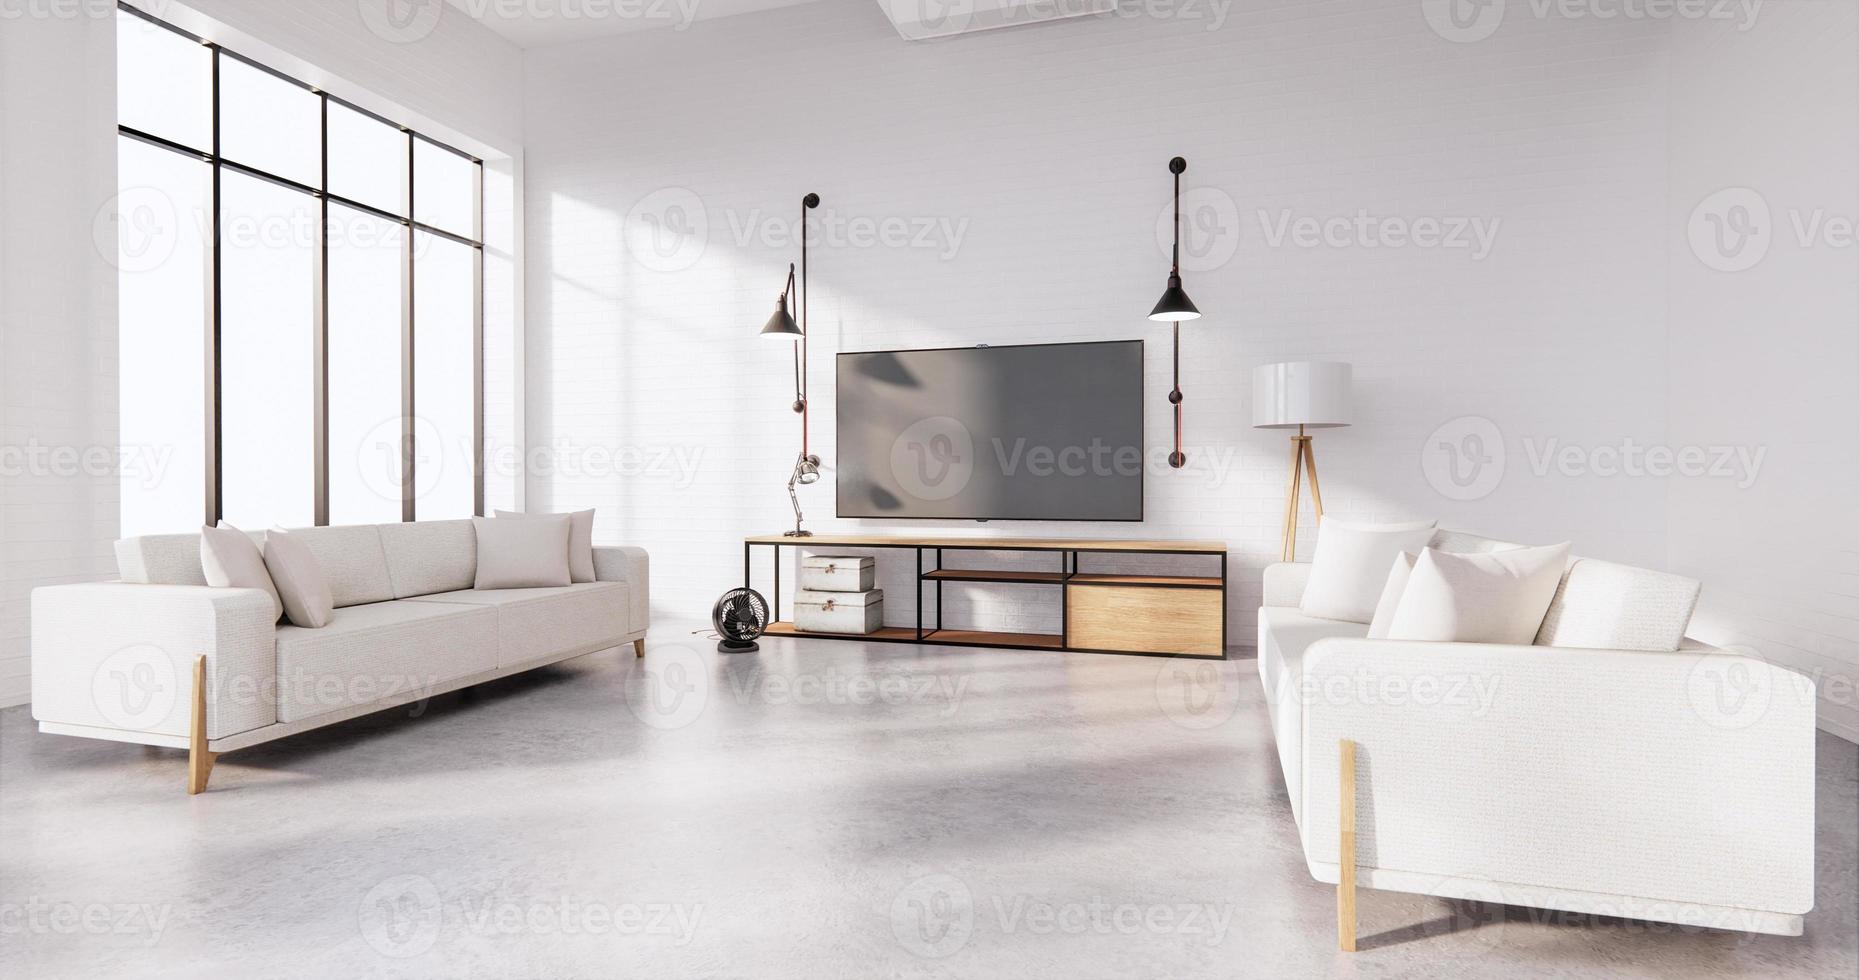 Smart Tv on Cabinet in Living room Loft style with white brick wall on wooden floor and sofa armchair.3D rendering photo